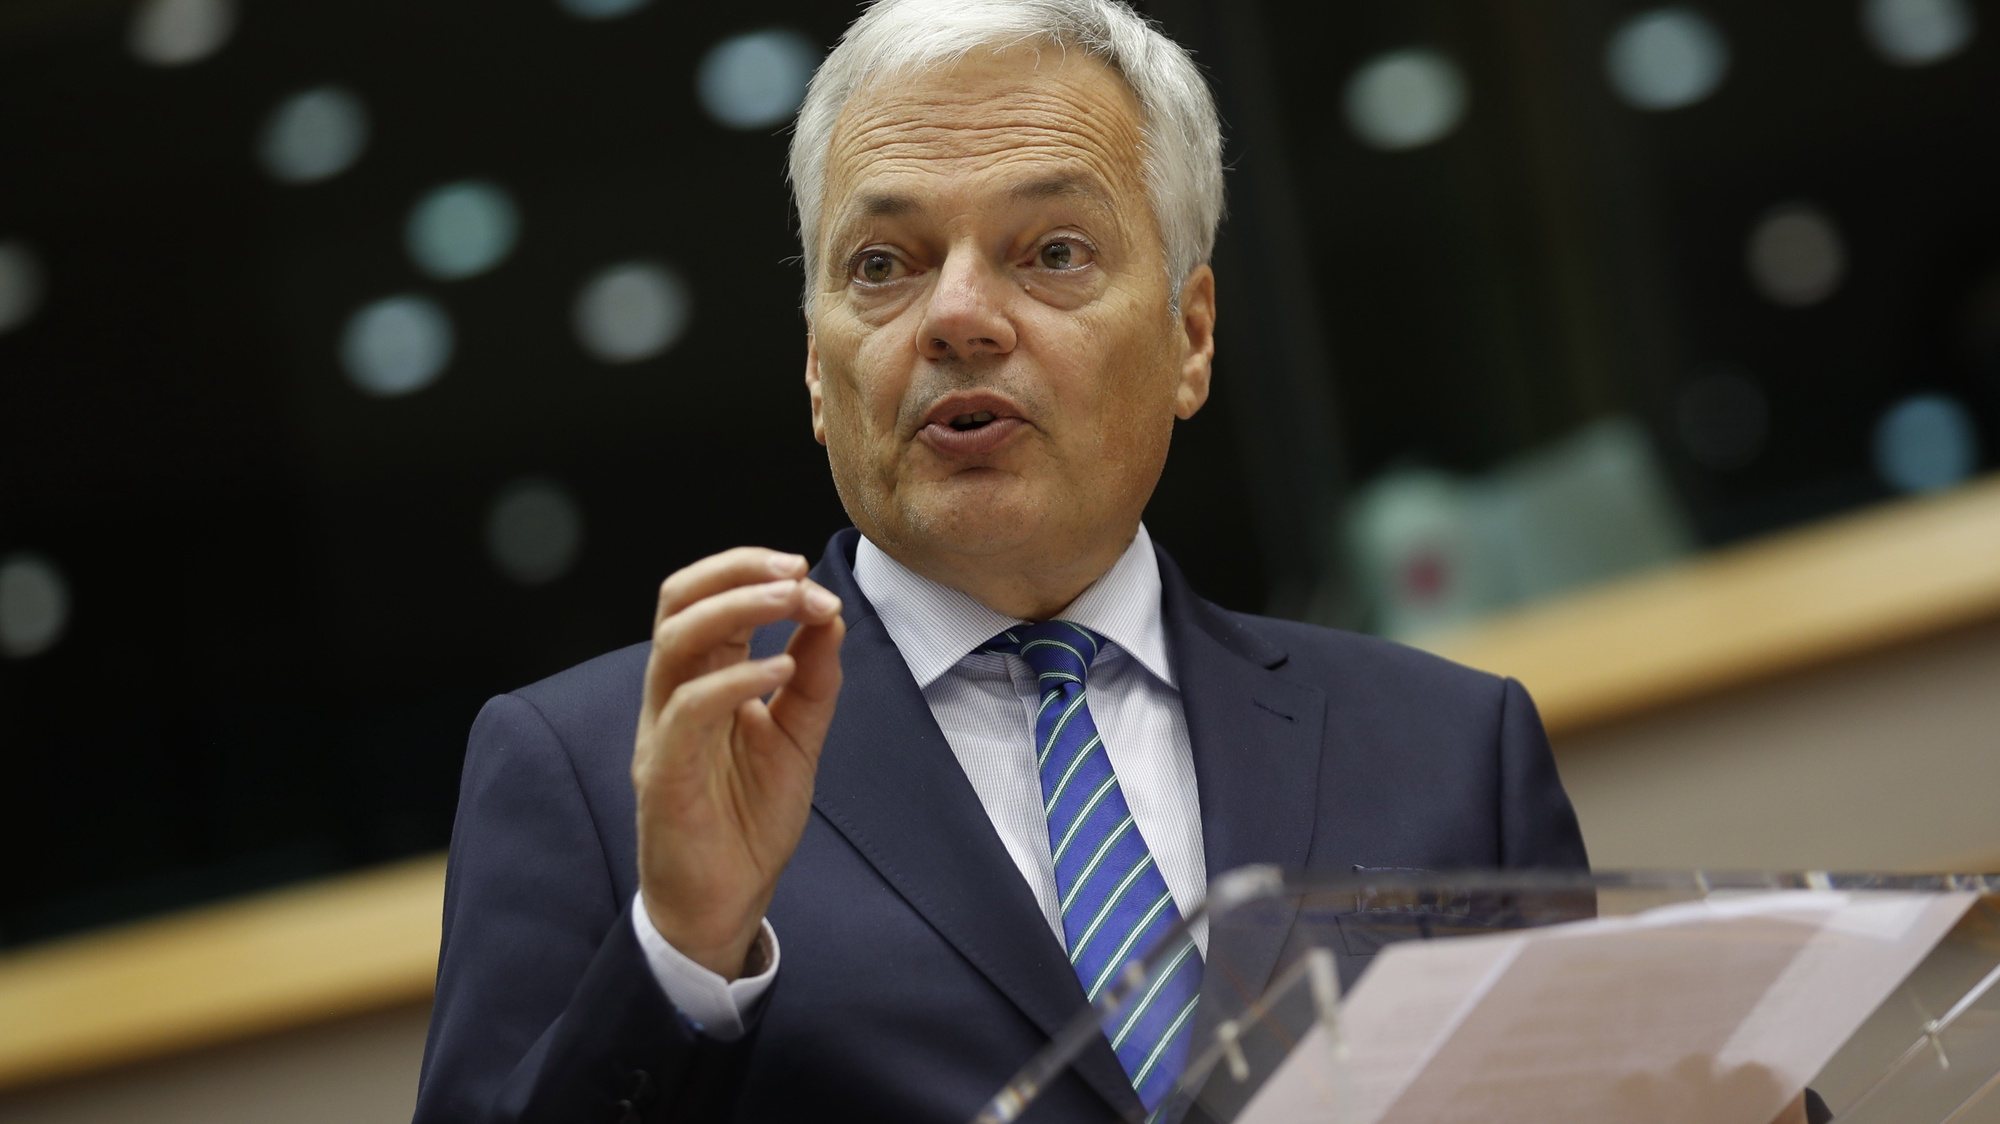 epa08722378 European Commissioner for Justice Didier Reynders addresses European lawmakers on the Establishment of an EU Mechanism on Democracy, the Rule of Law and Fundamental Rights during a plenary session at the European Parliament in Brussels, Belgium, 05 October 2020.  EPA/FRANCISCO SECO / POOL